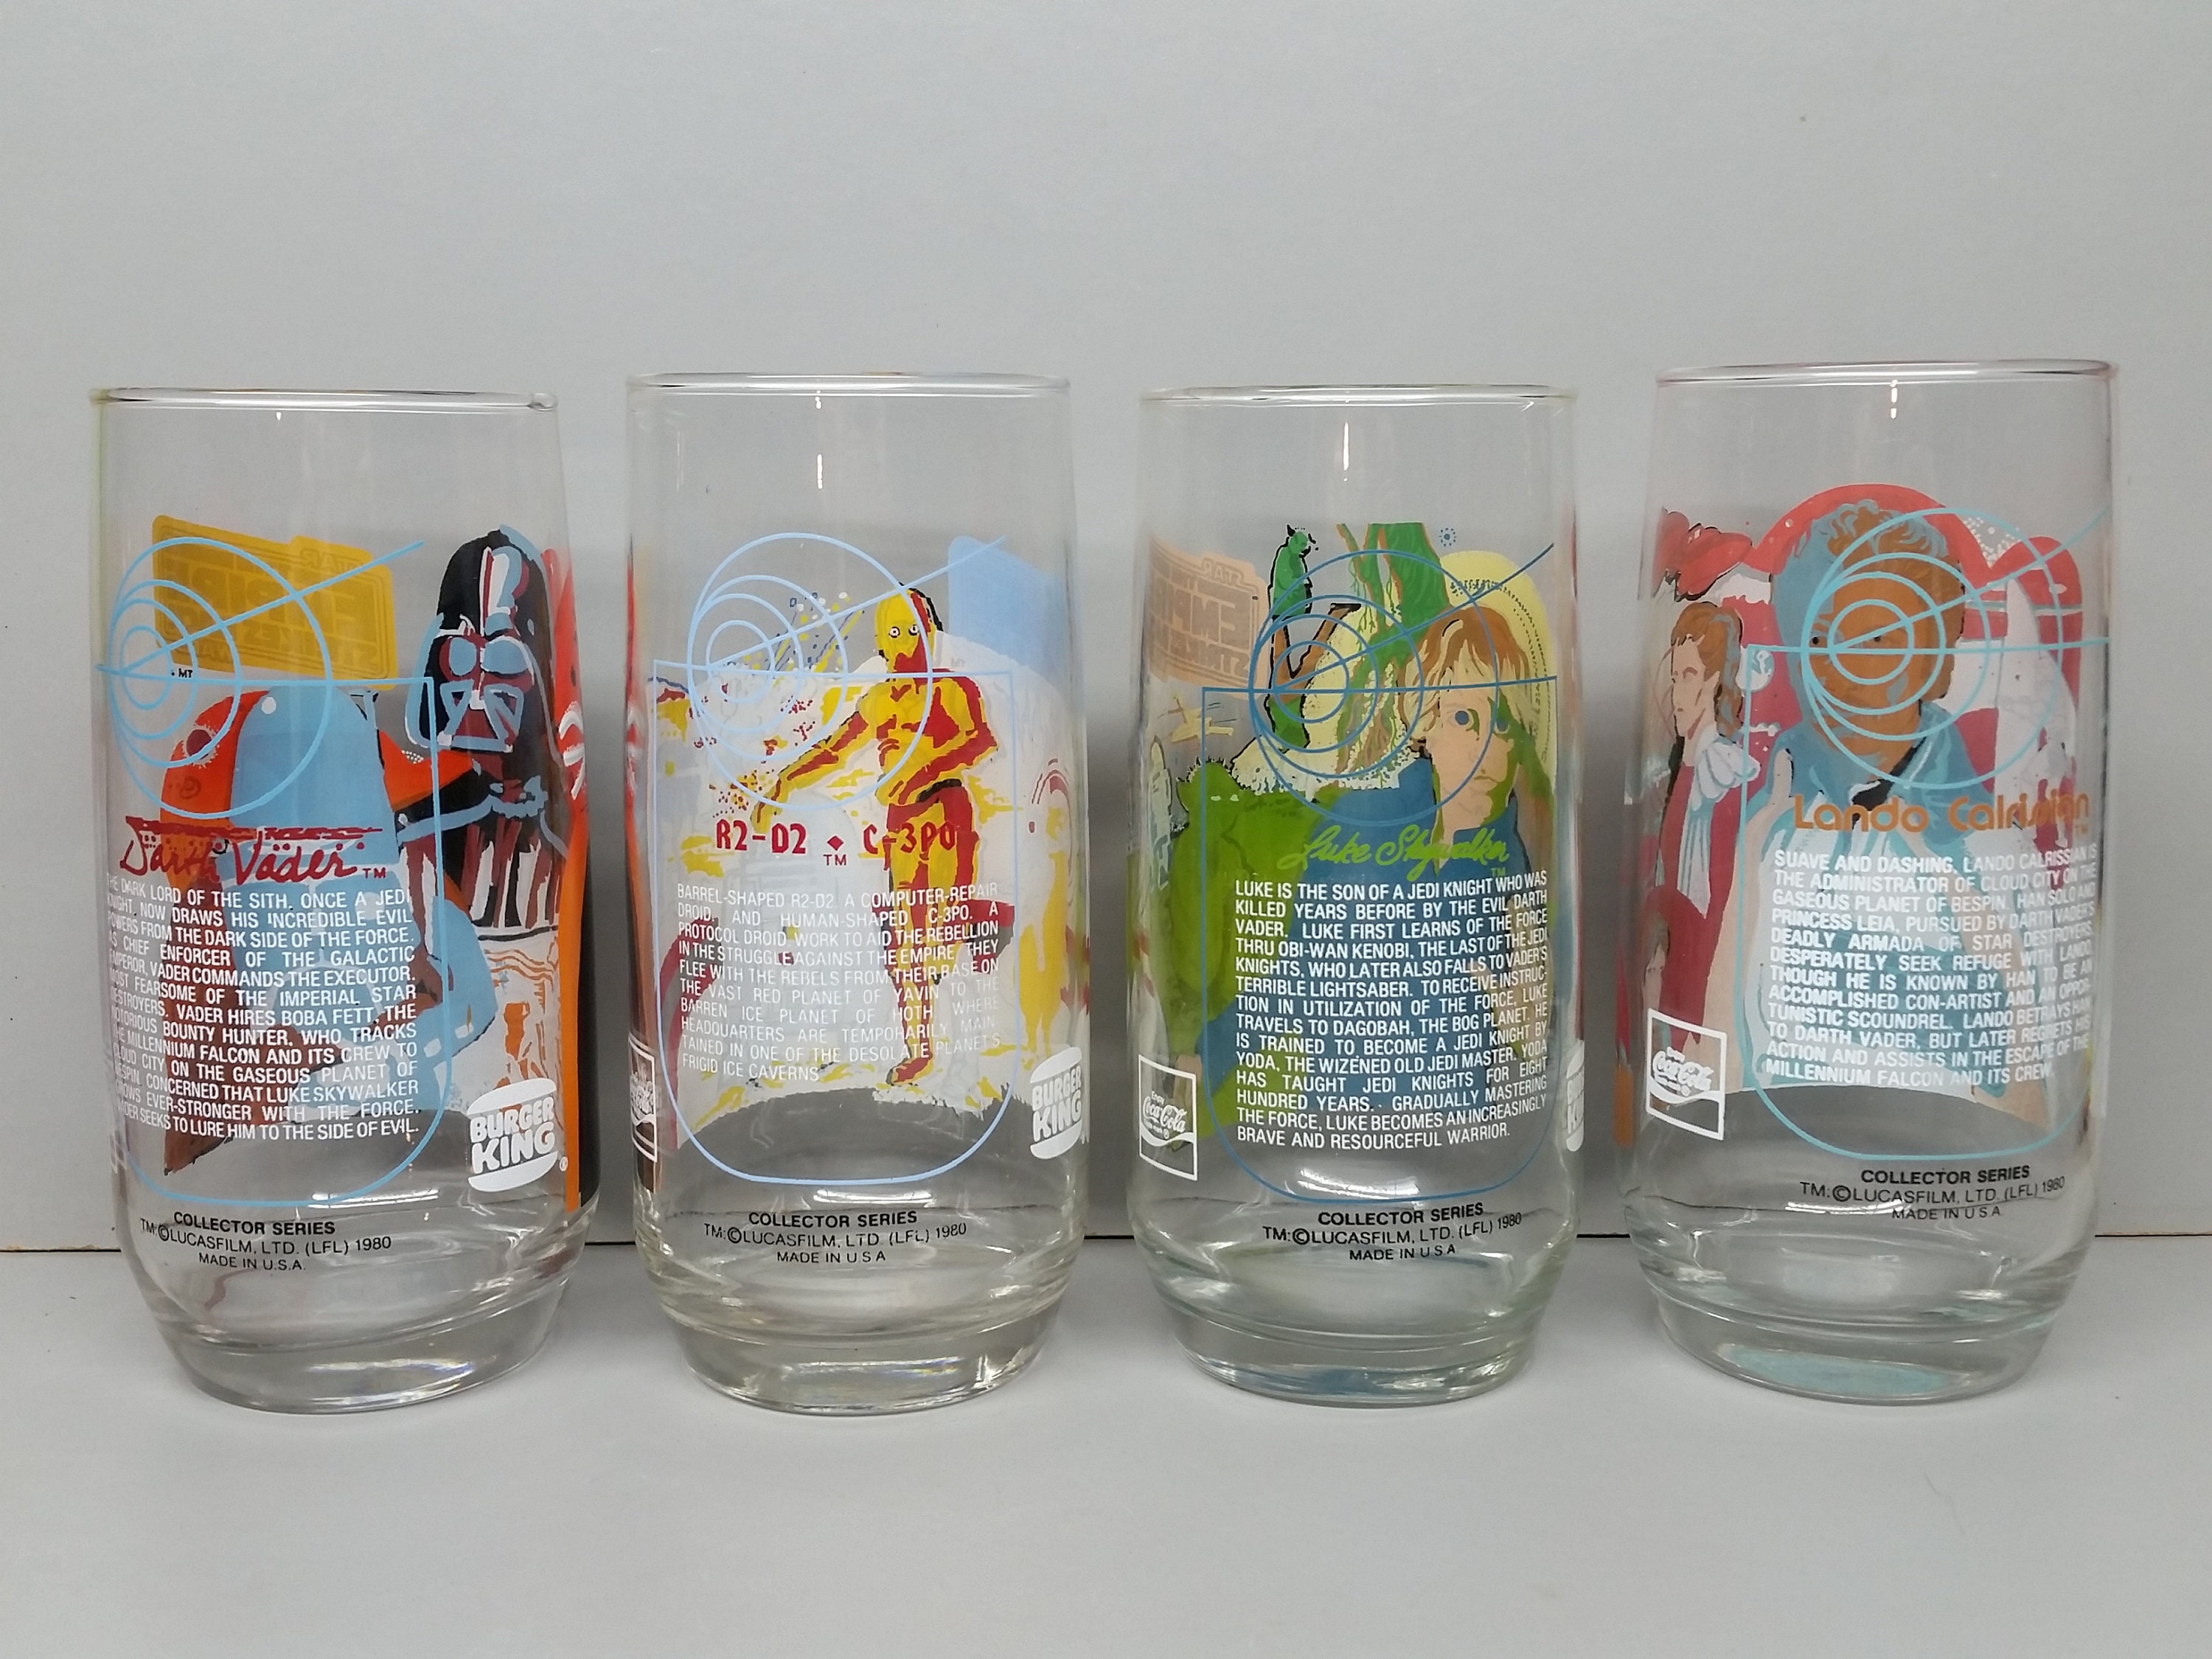 1980 Burger King Empire Strikes Back glasses. My parents bought